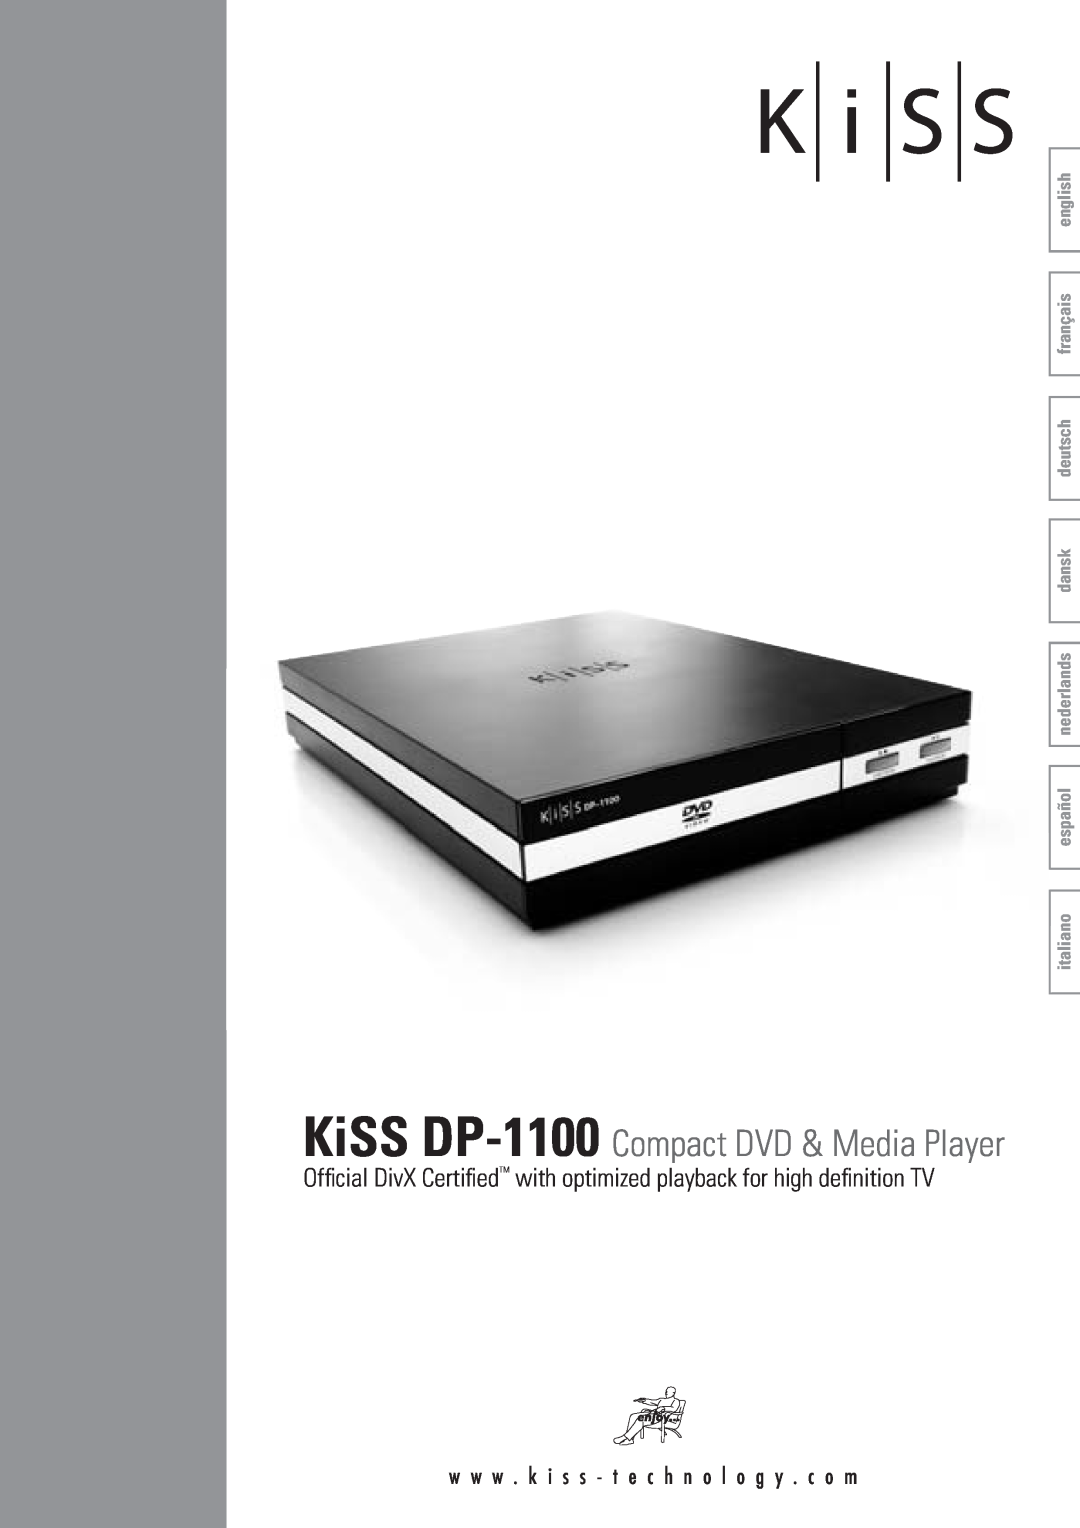 KiSS Networked Entertainment manual KiSS DP-1100 Compact DVD & Media Player 